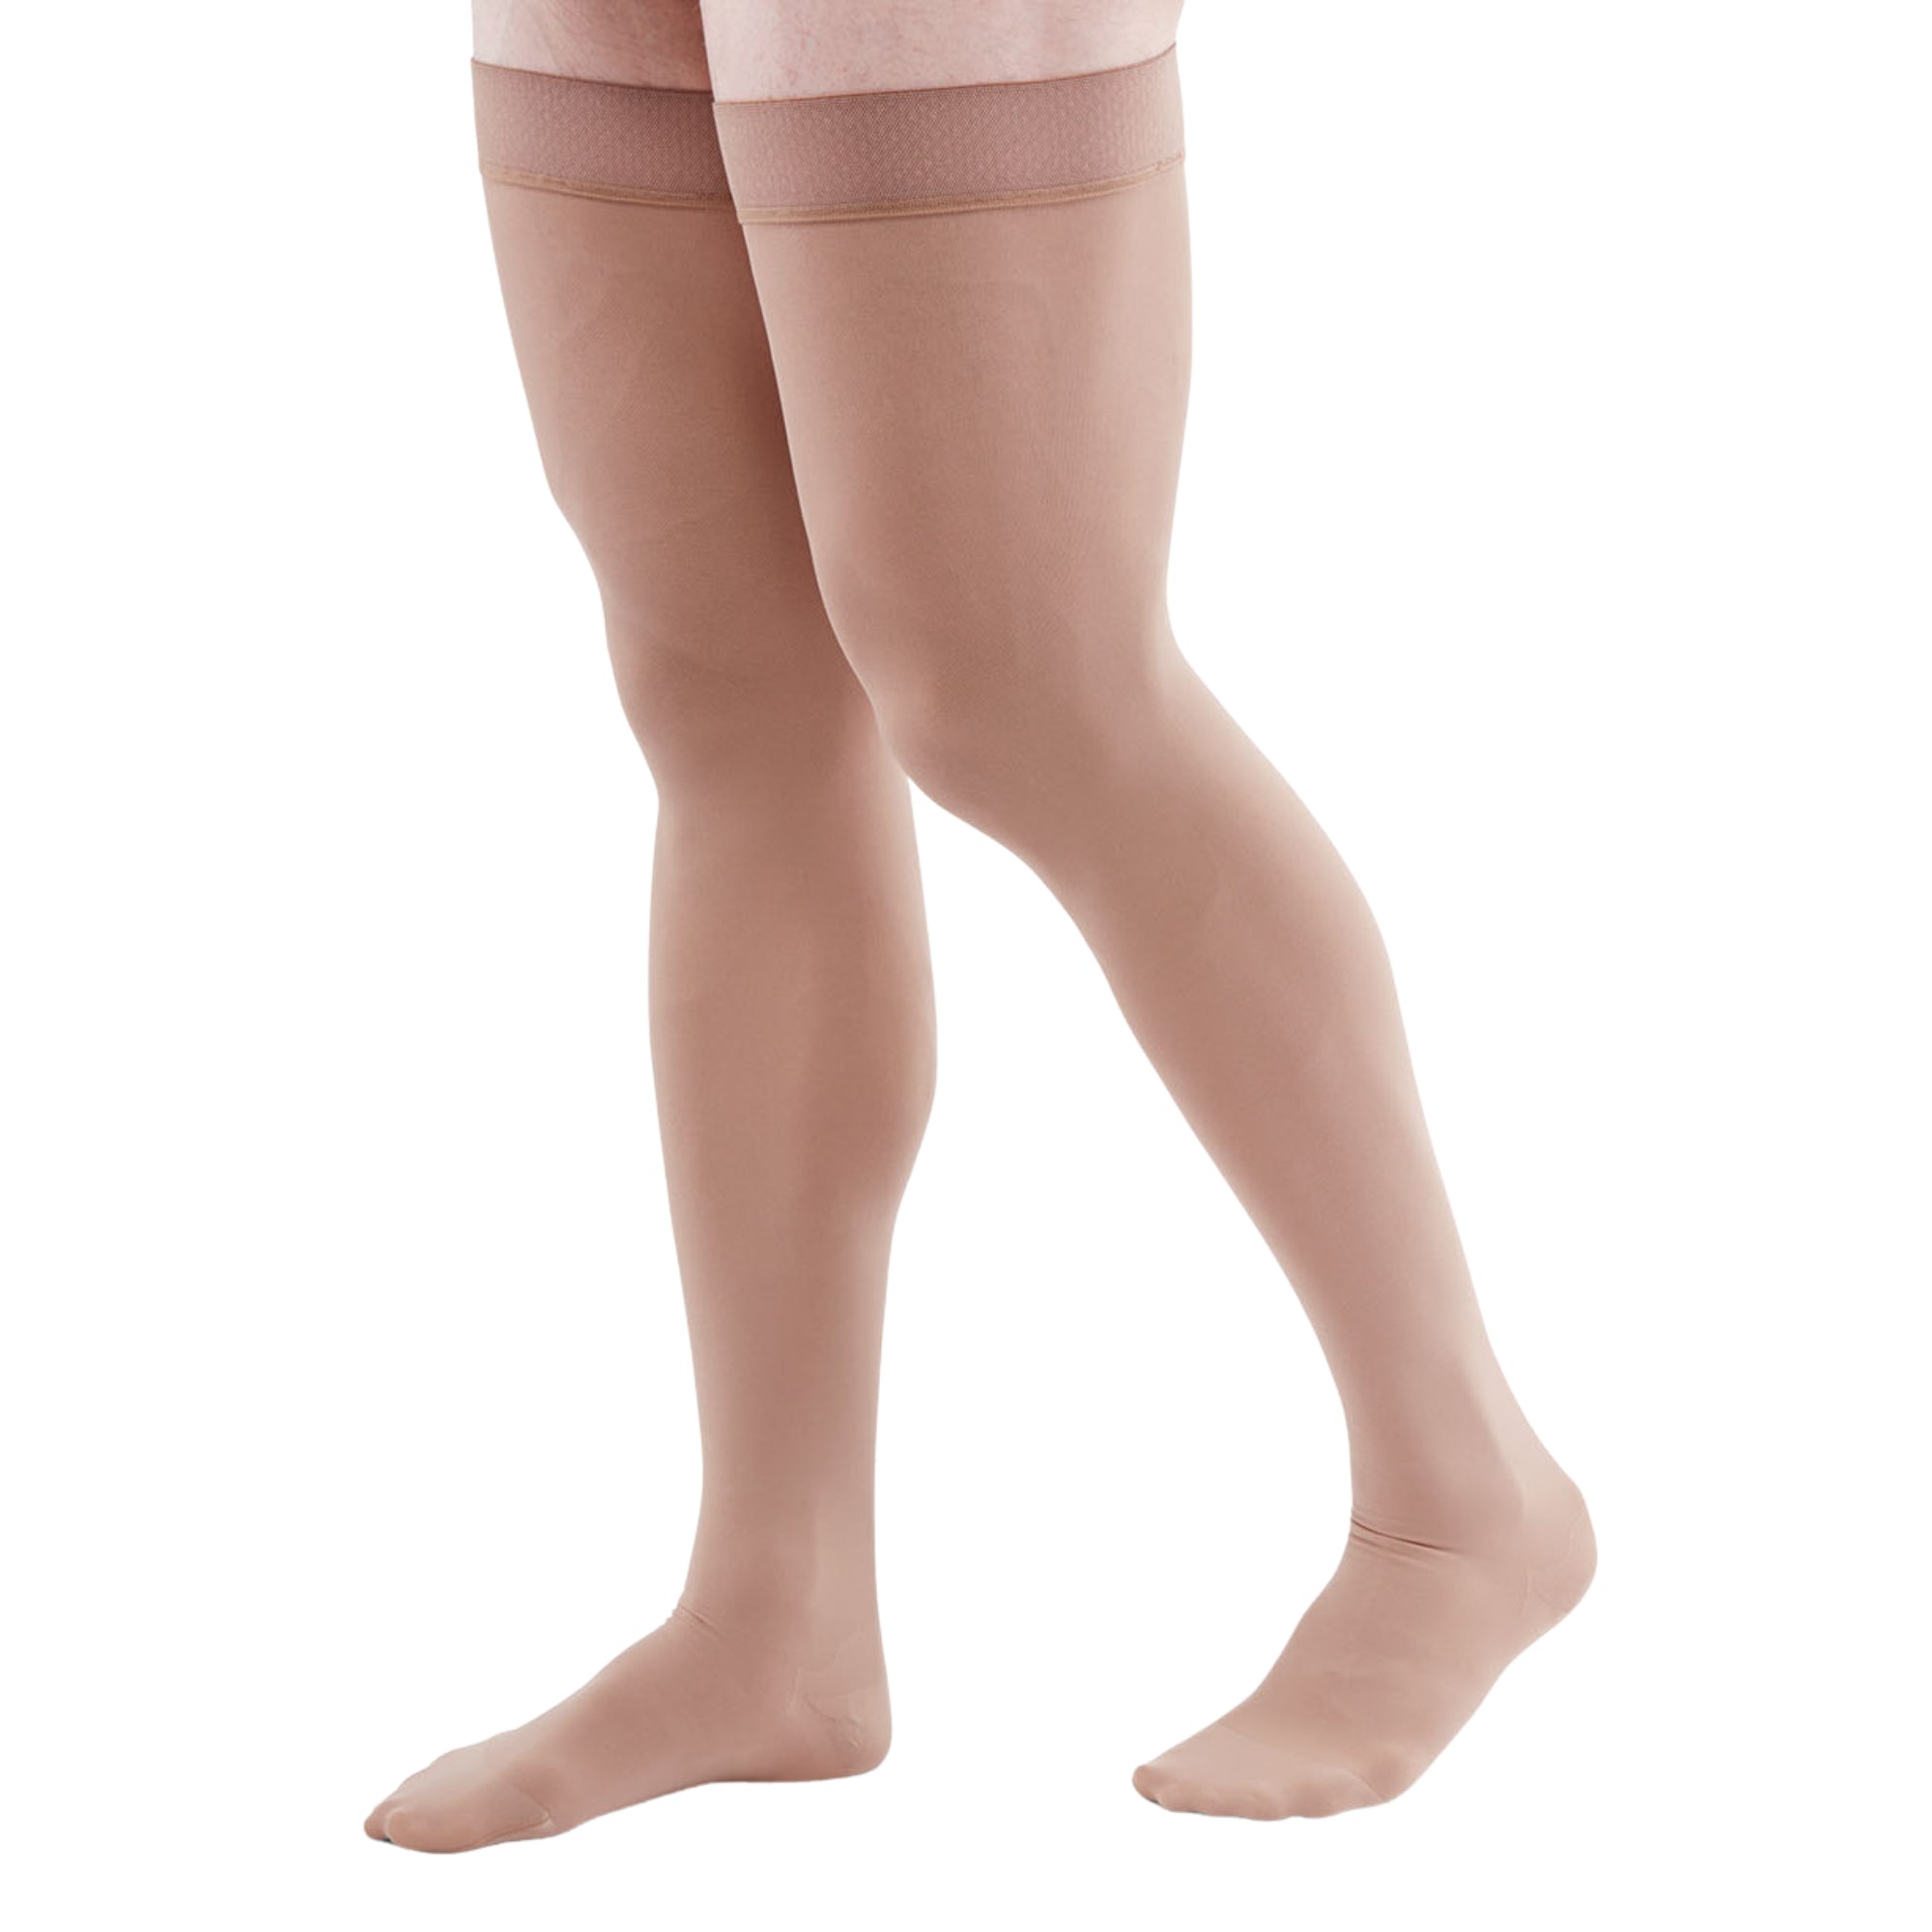 Support Plus Women's Sheer Closed Toe Mild Compression Pantyhose - Size E-F